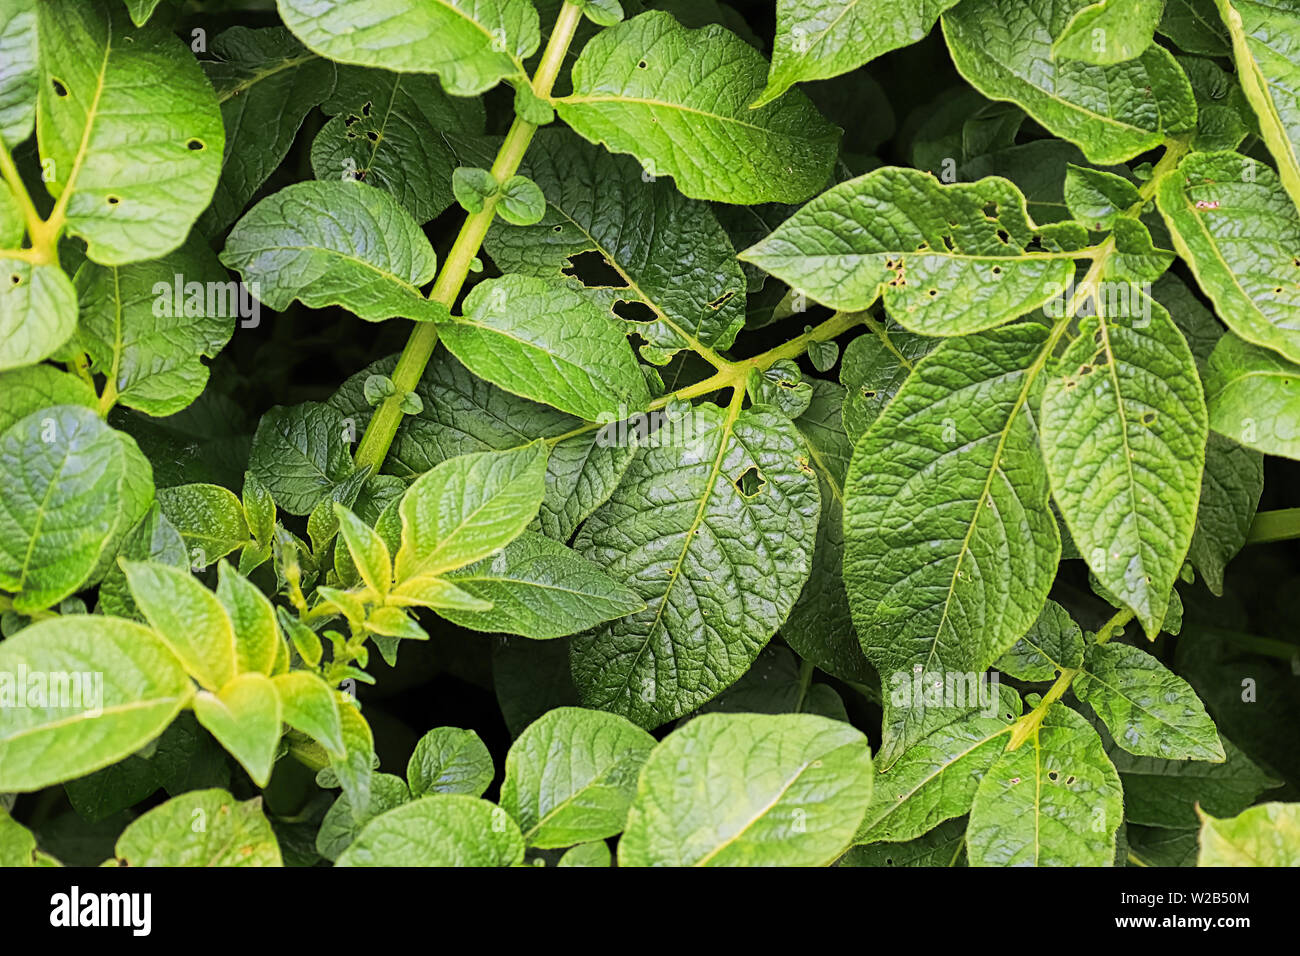 A background of potato leaves with some small eaten holes Stock Photo